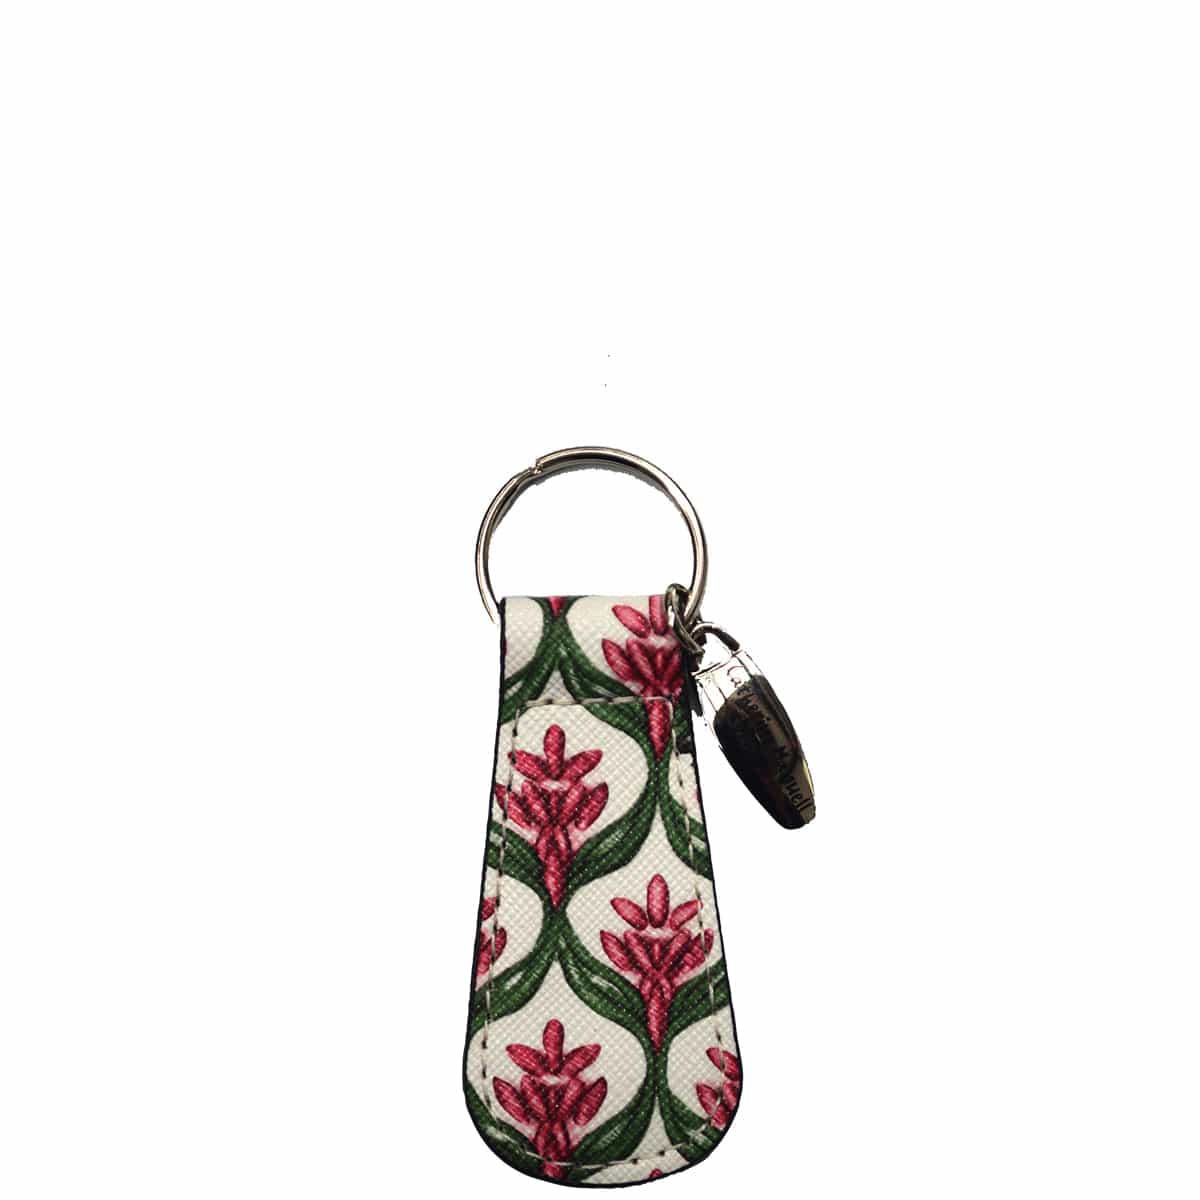 Key Tag - French Chateau Green Pink